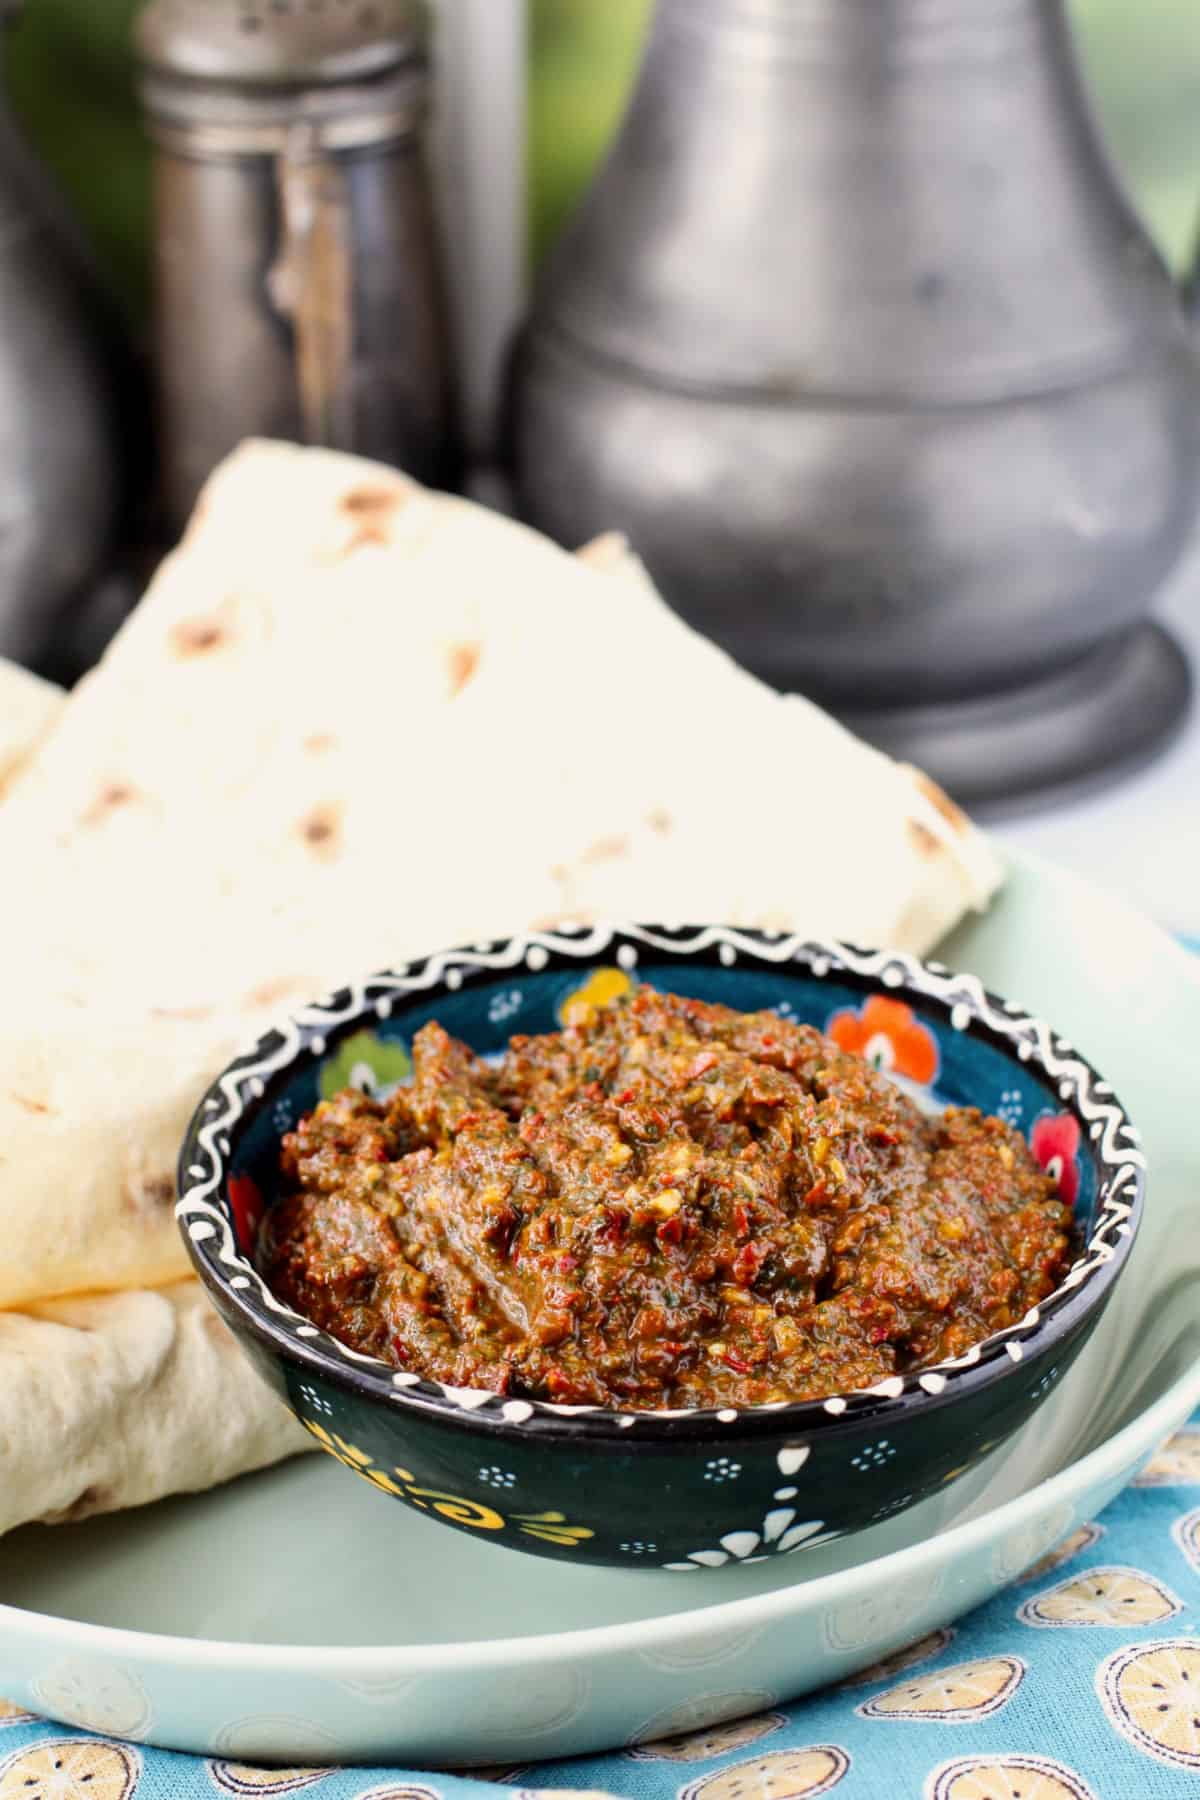 Red Zhug (Yemenite Hot Sauce) in a bowl with Lavash.